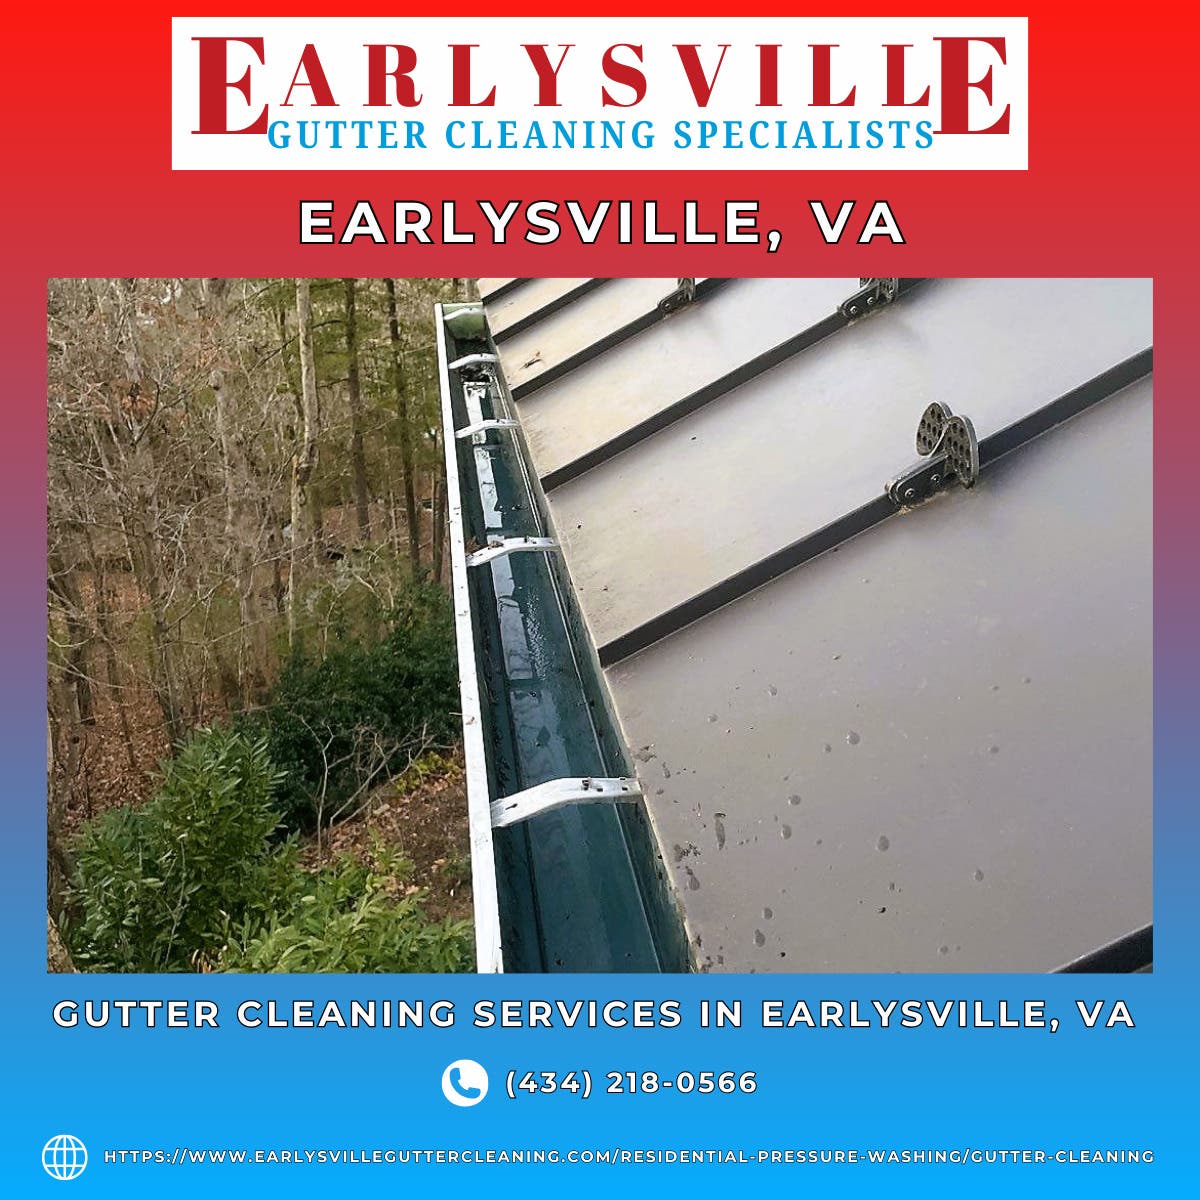 Gutter Cleaning Services in Earlysville, VA - Earlysville Gutter Cleaning Specialists